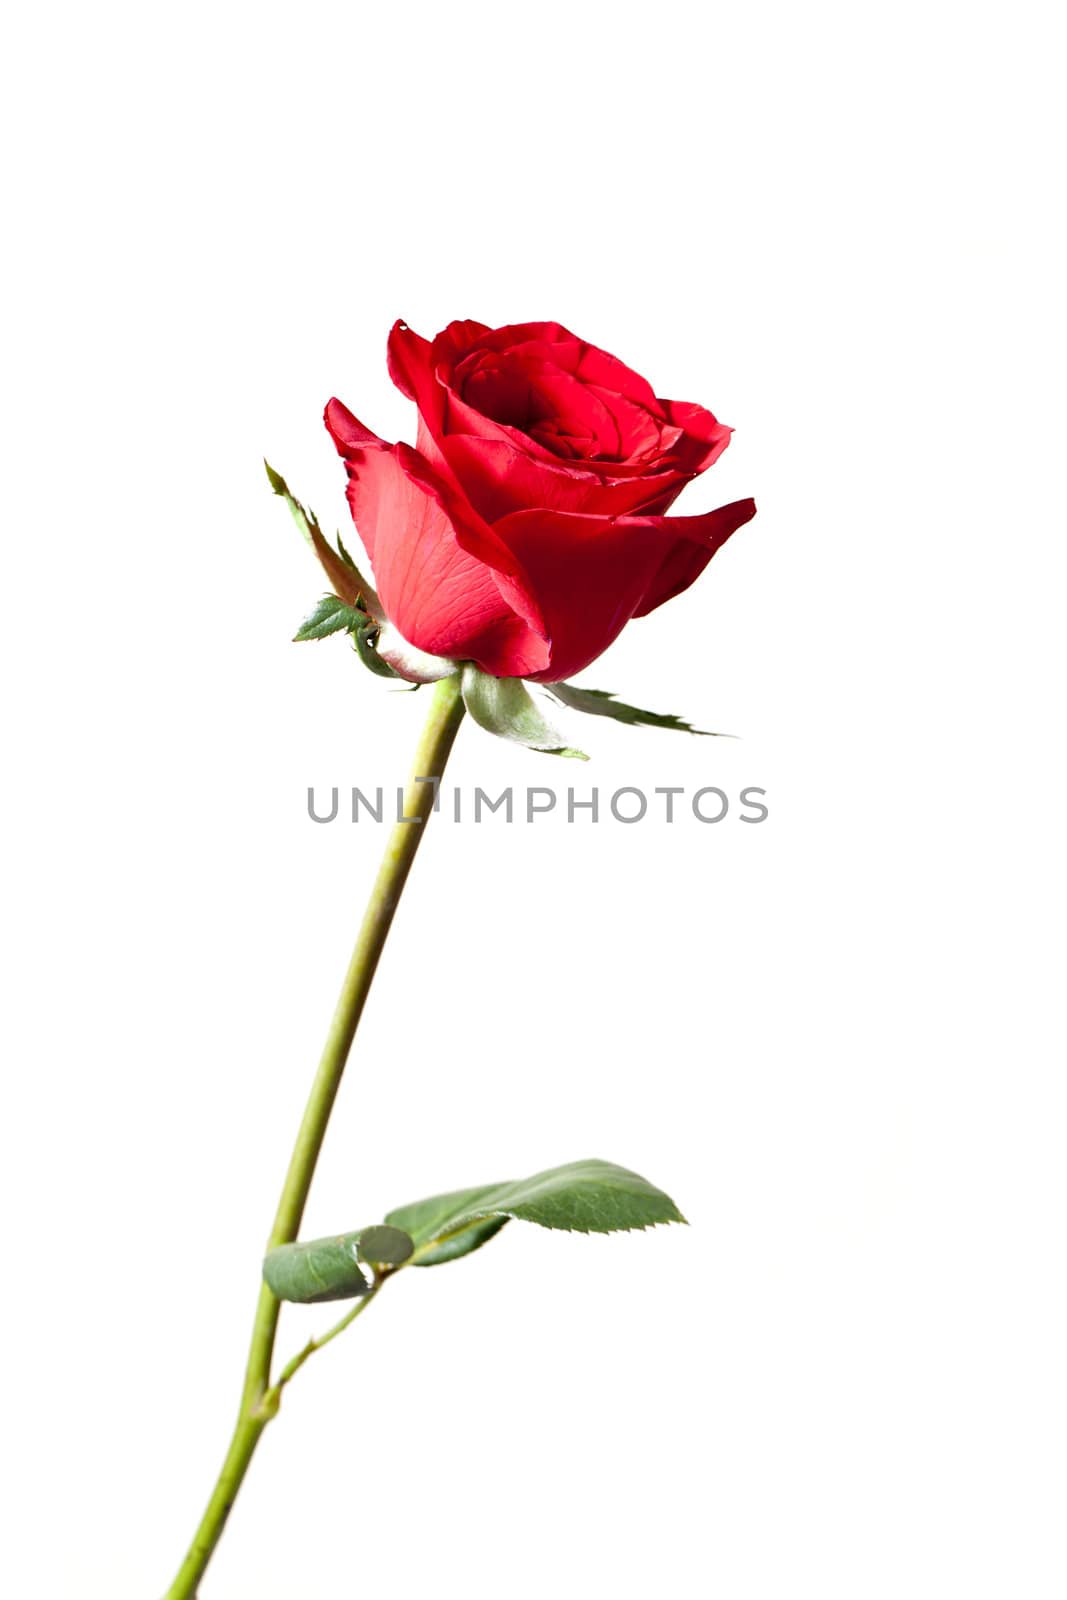 Red rose isolated on white background by kawing921